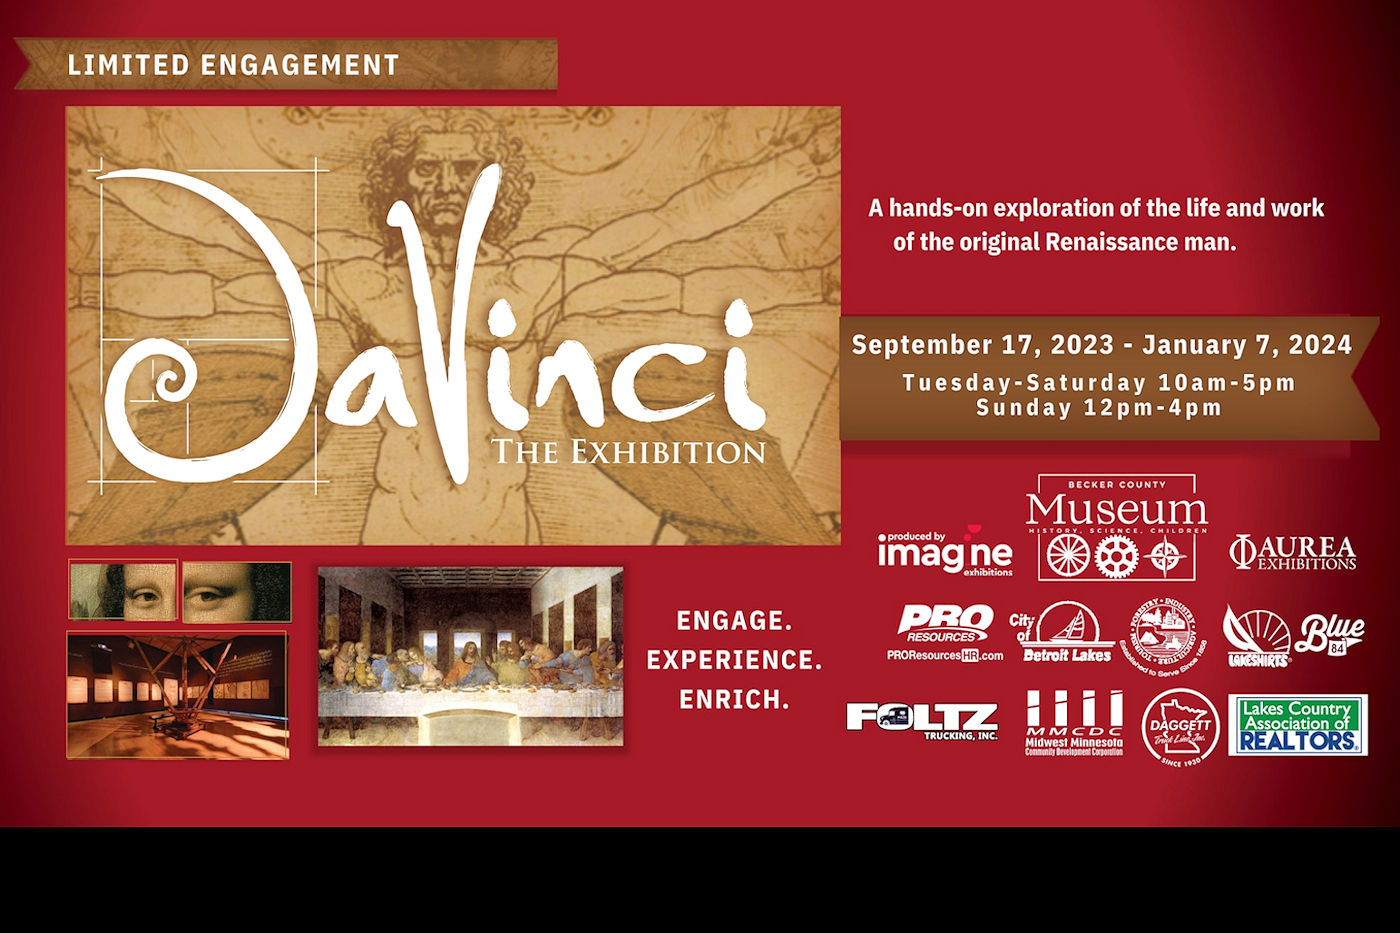 Da Vinci: The Exhibition at The Becker County Museum - Detroit Lakes Minnesota - September 17, 2023 - January 7, 2024